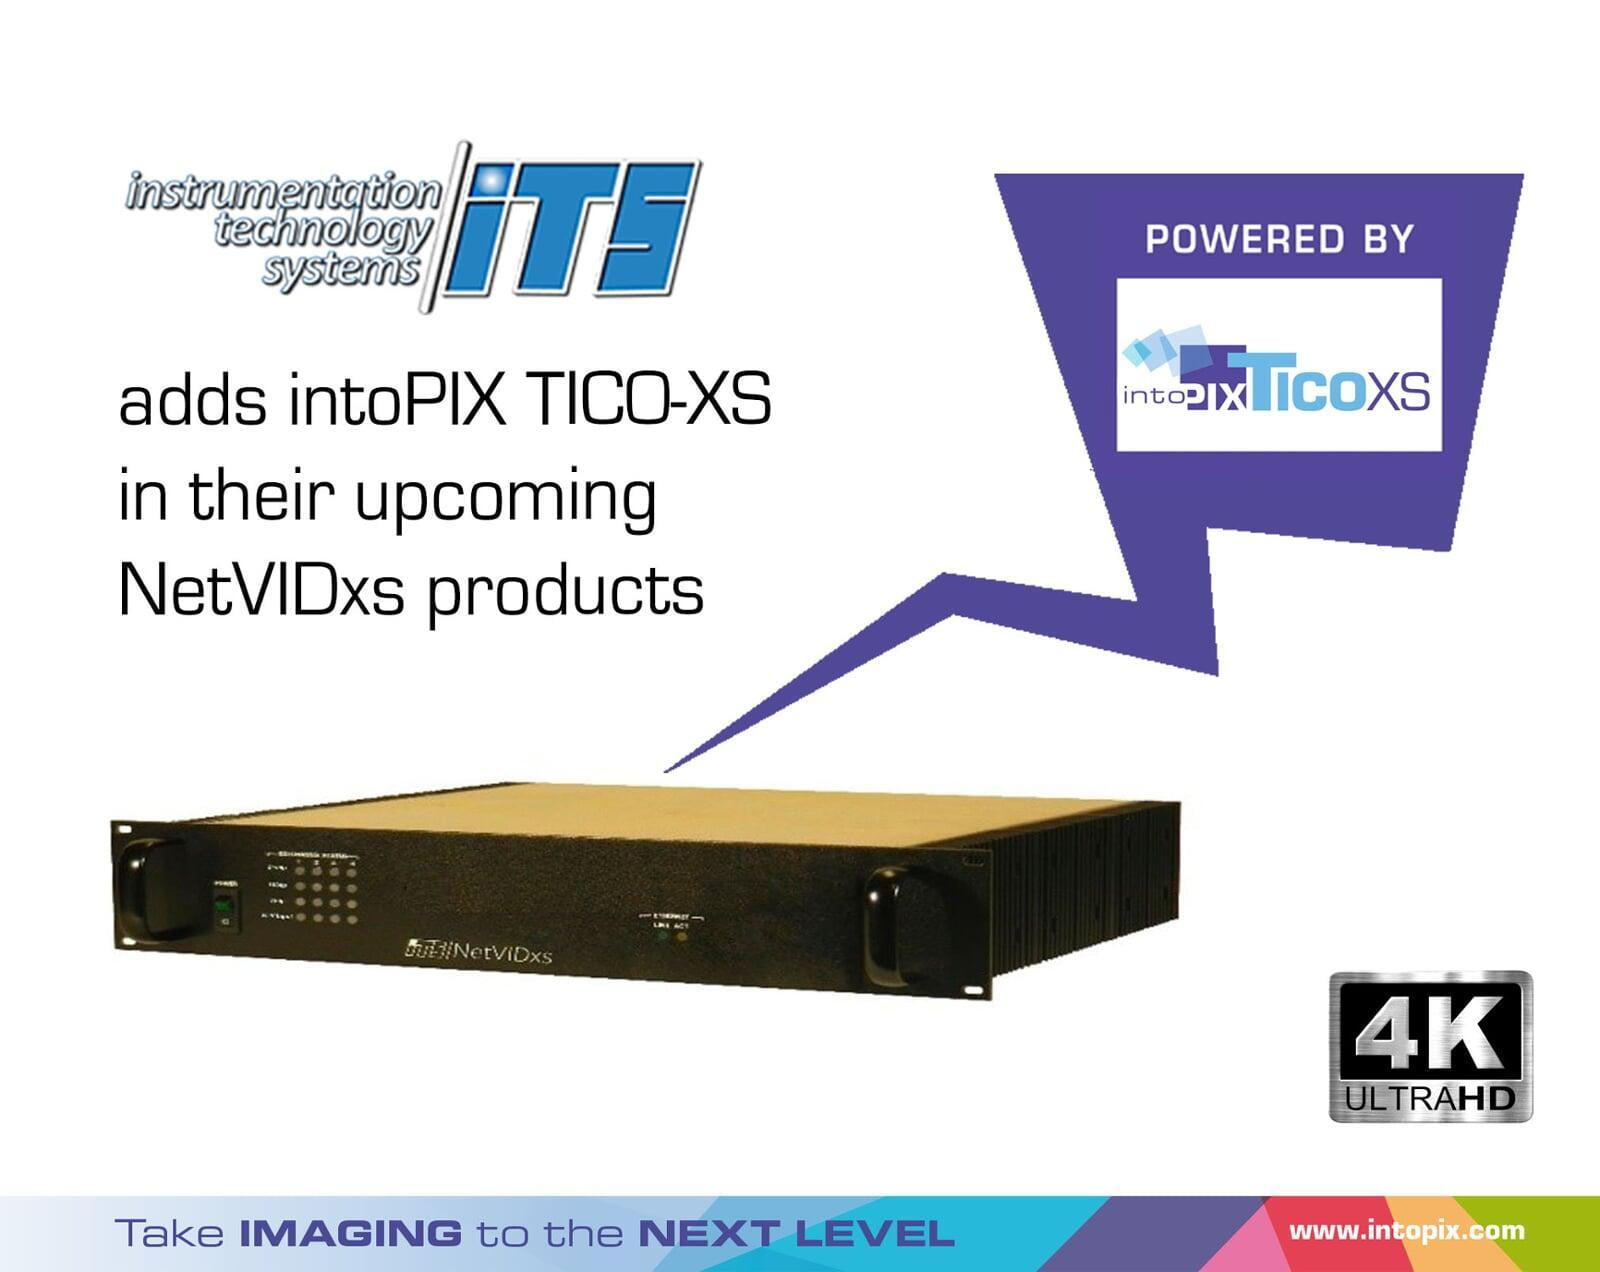 Instrumentation Technology Systems adds intoPIX TicoXS to their upcoming NetVIDxs